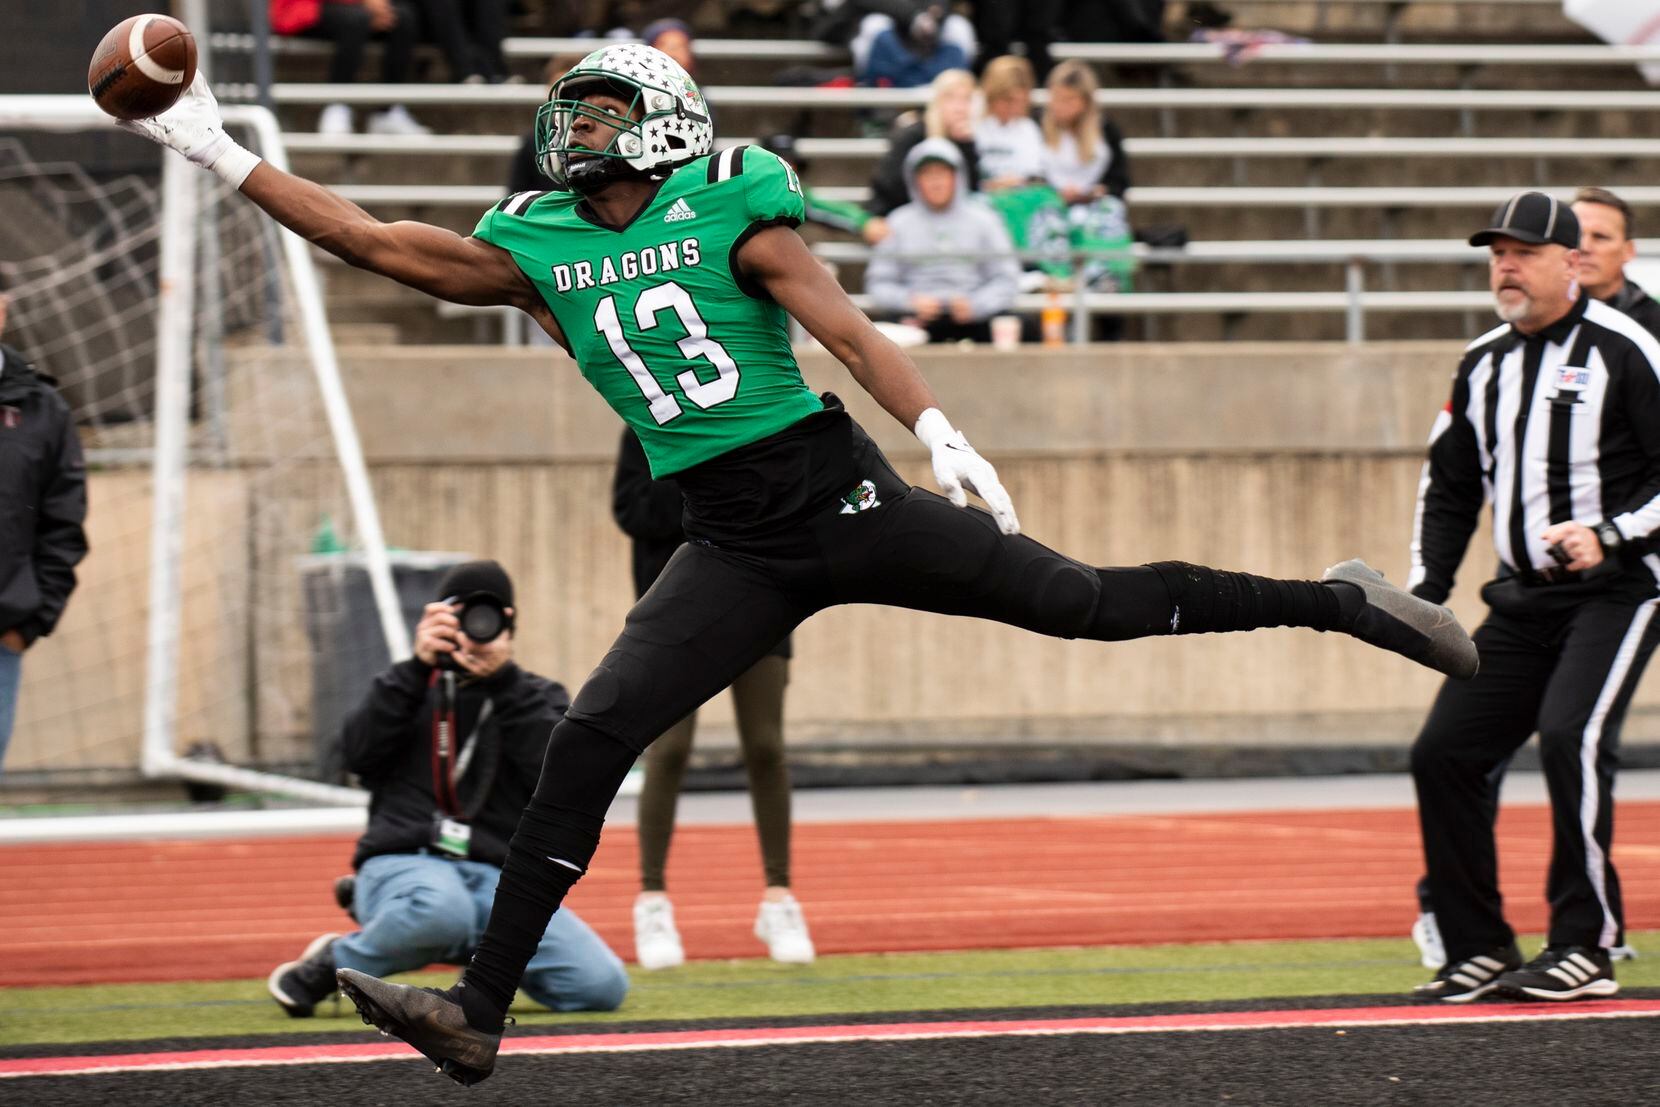 Southlake Carroll senior RJ Maryland (13) reaches for the ball during the Class 6A Division I Region I semifinal game between Southlake Carroll and Lewisville at Buddy Echols Field in Coppell, Texas on Saturday, November 27, 2021. (Emil Lippe/Special Contributor)